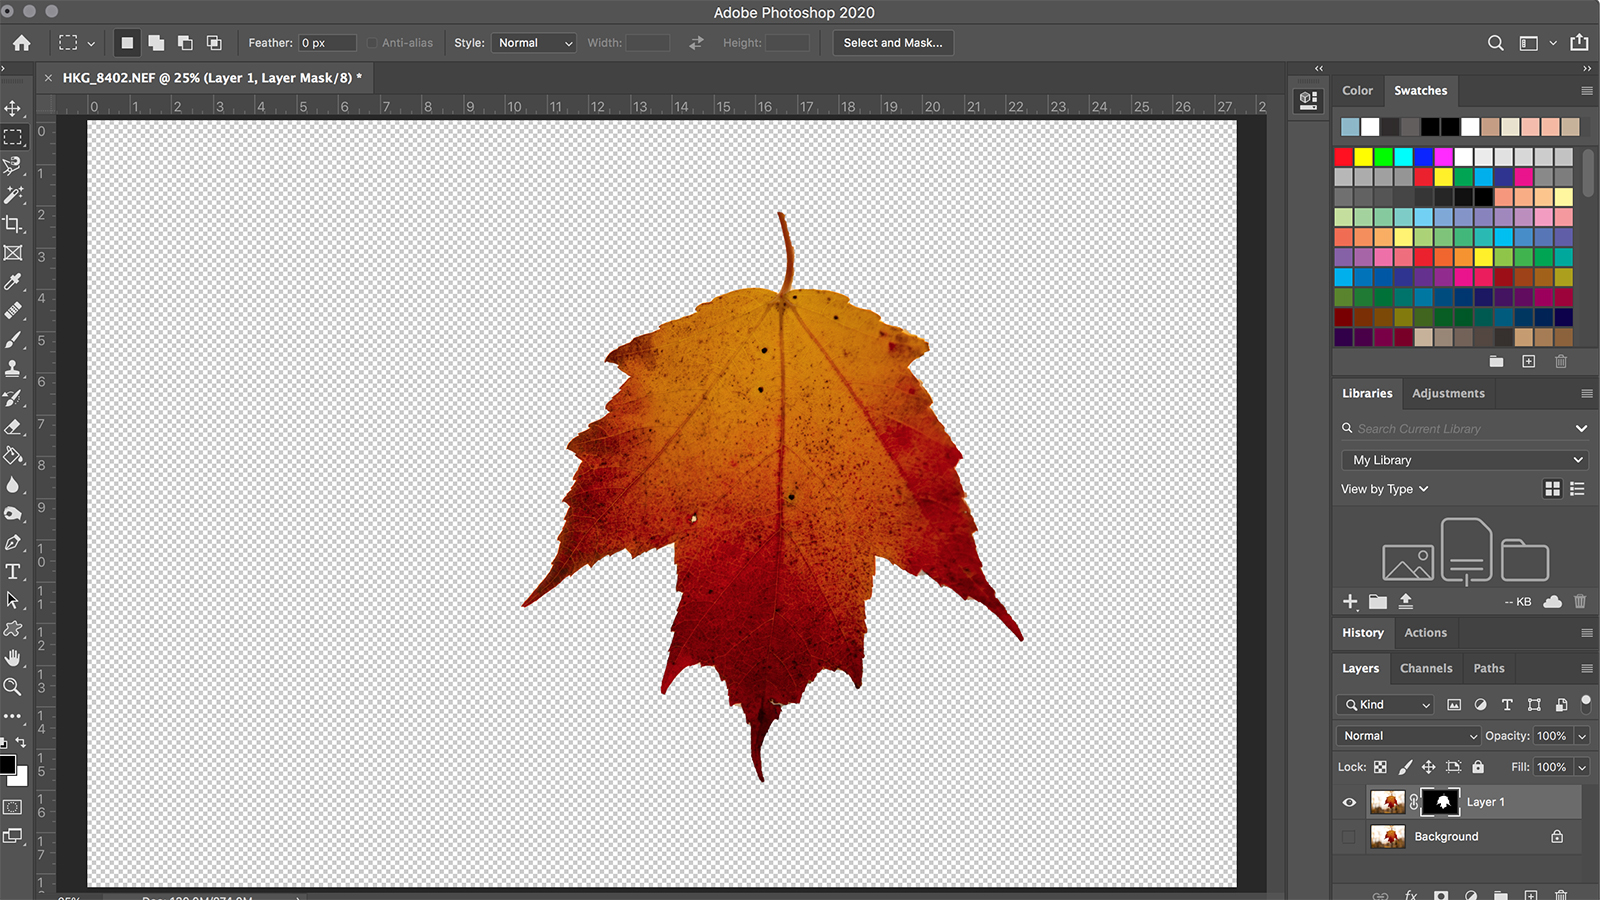 How to Make a Background Transparent in Photoshop | Digital Trends